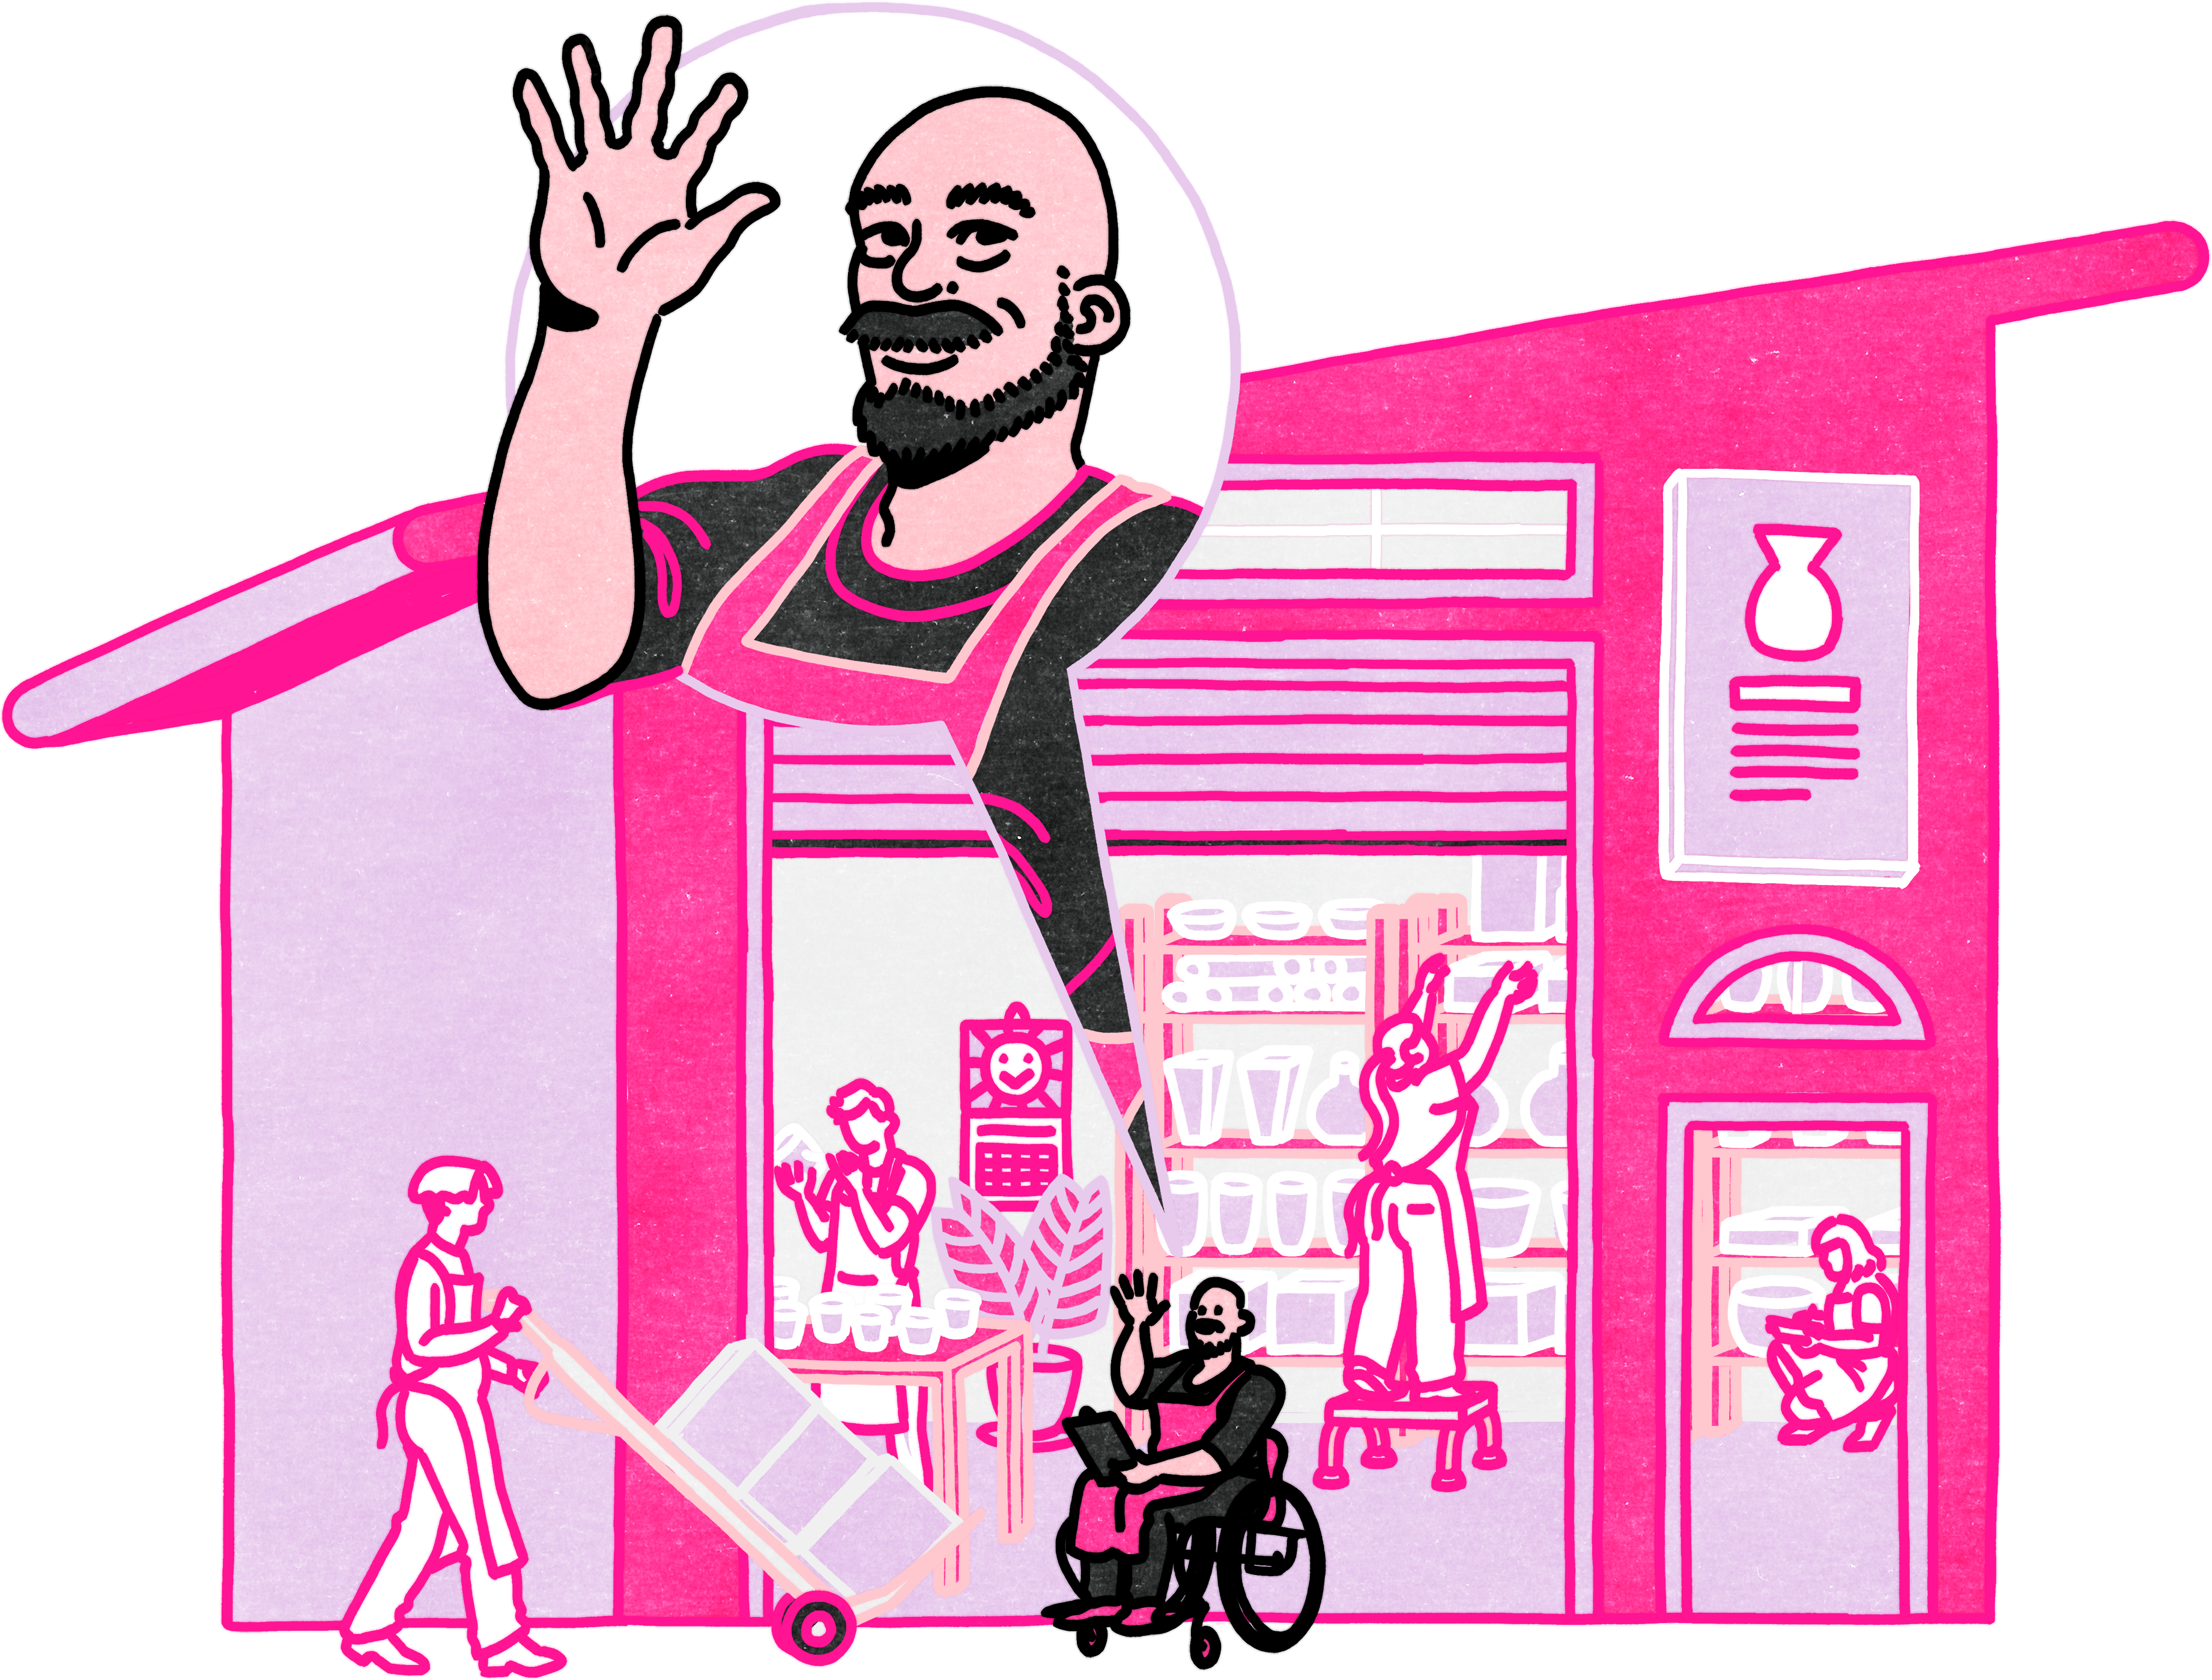 A graphic illustration in shades of pink and purple of a store selling craft wares. The people inside and outside of the store are working and shopping. The person in front in a wheelchair is smiling and waving.